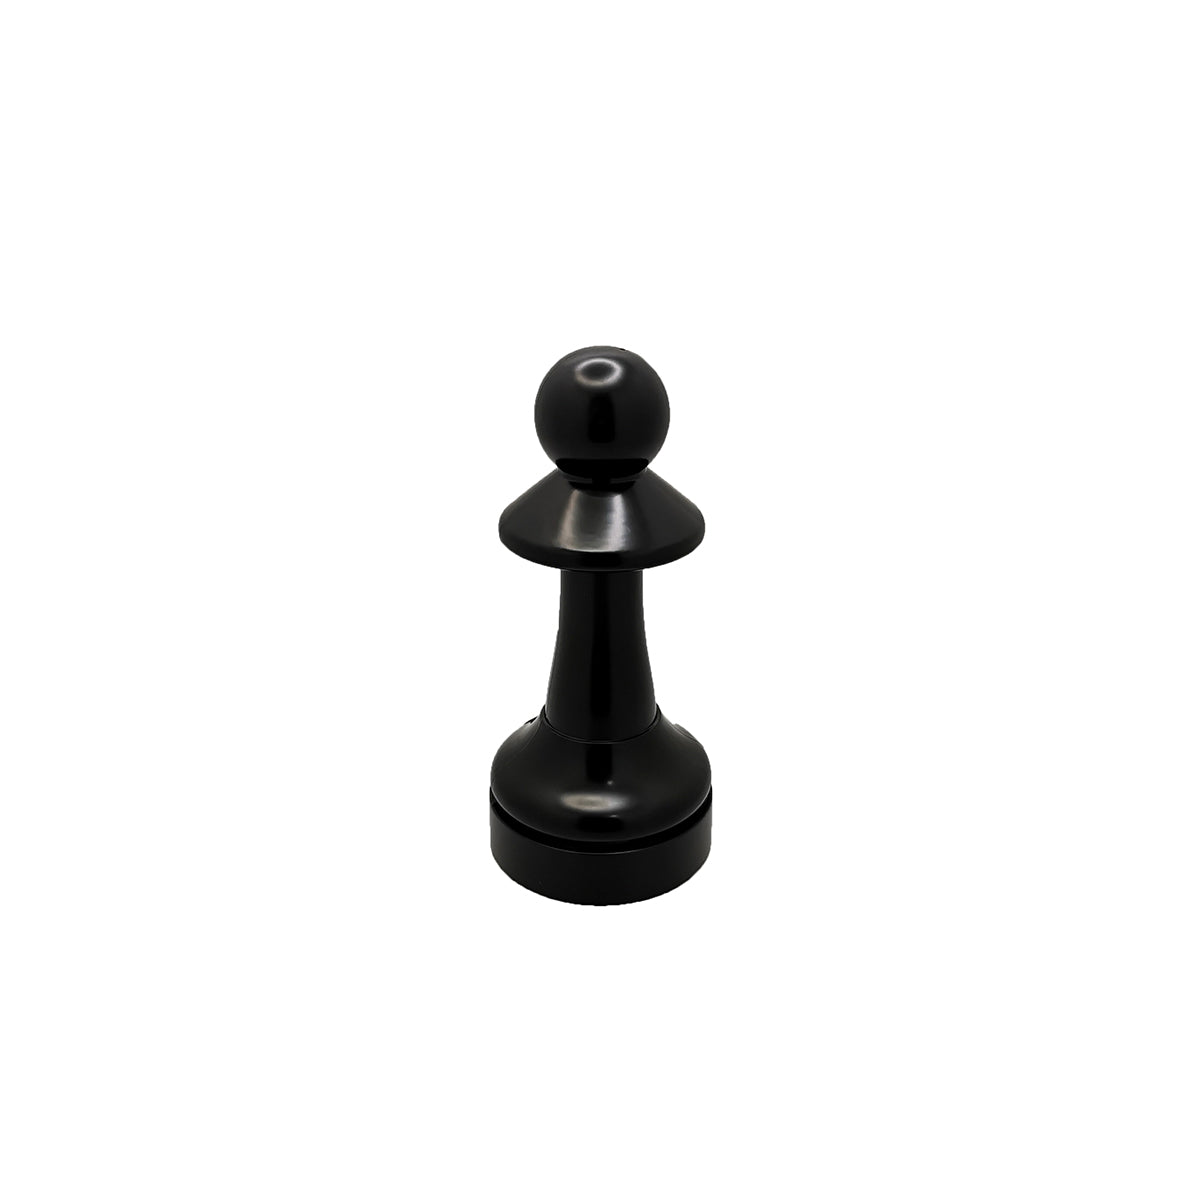 Giant Garden Chess 43cm Replacement Pieces Black Pawn